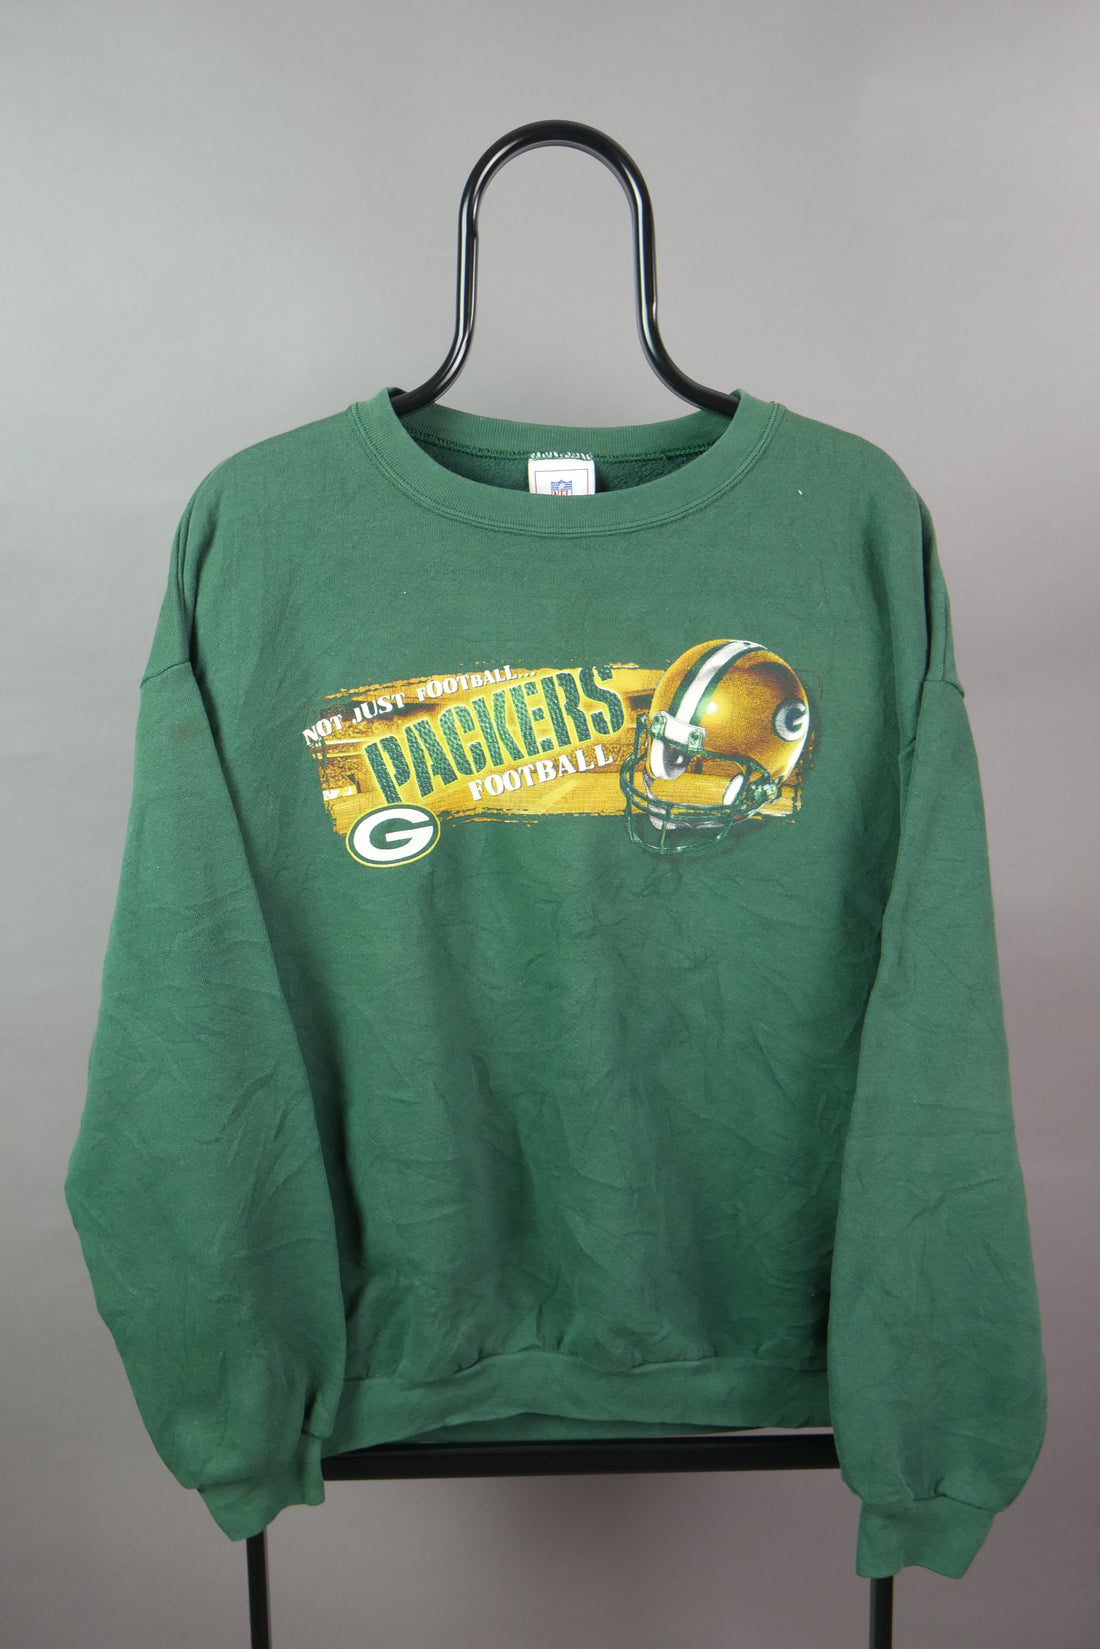 The Packers Football Graphic Sweatshirt (L)